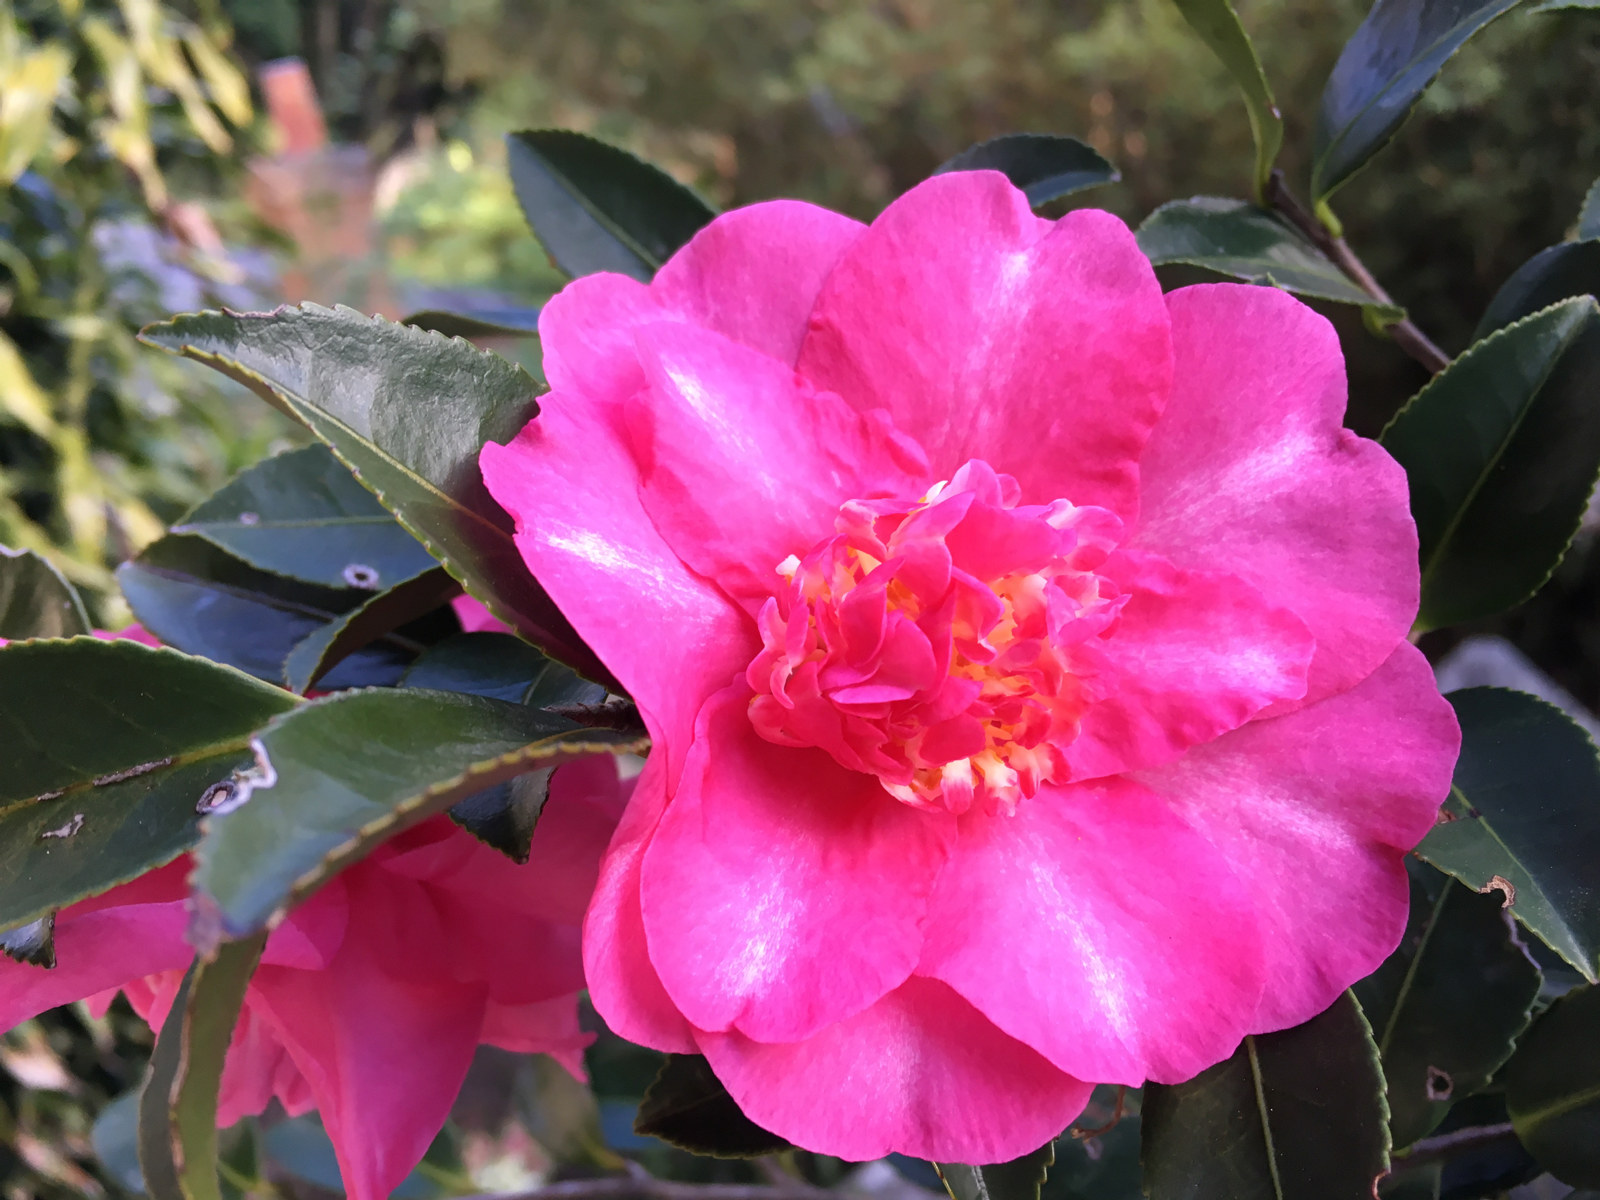 Camellia sasanqua Sp. has bright pink flowers with hidden yellow stamens at Vaucluse House